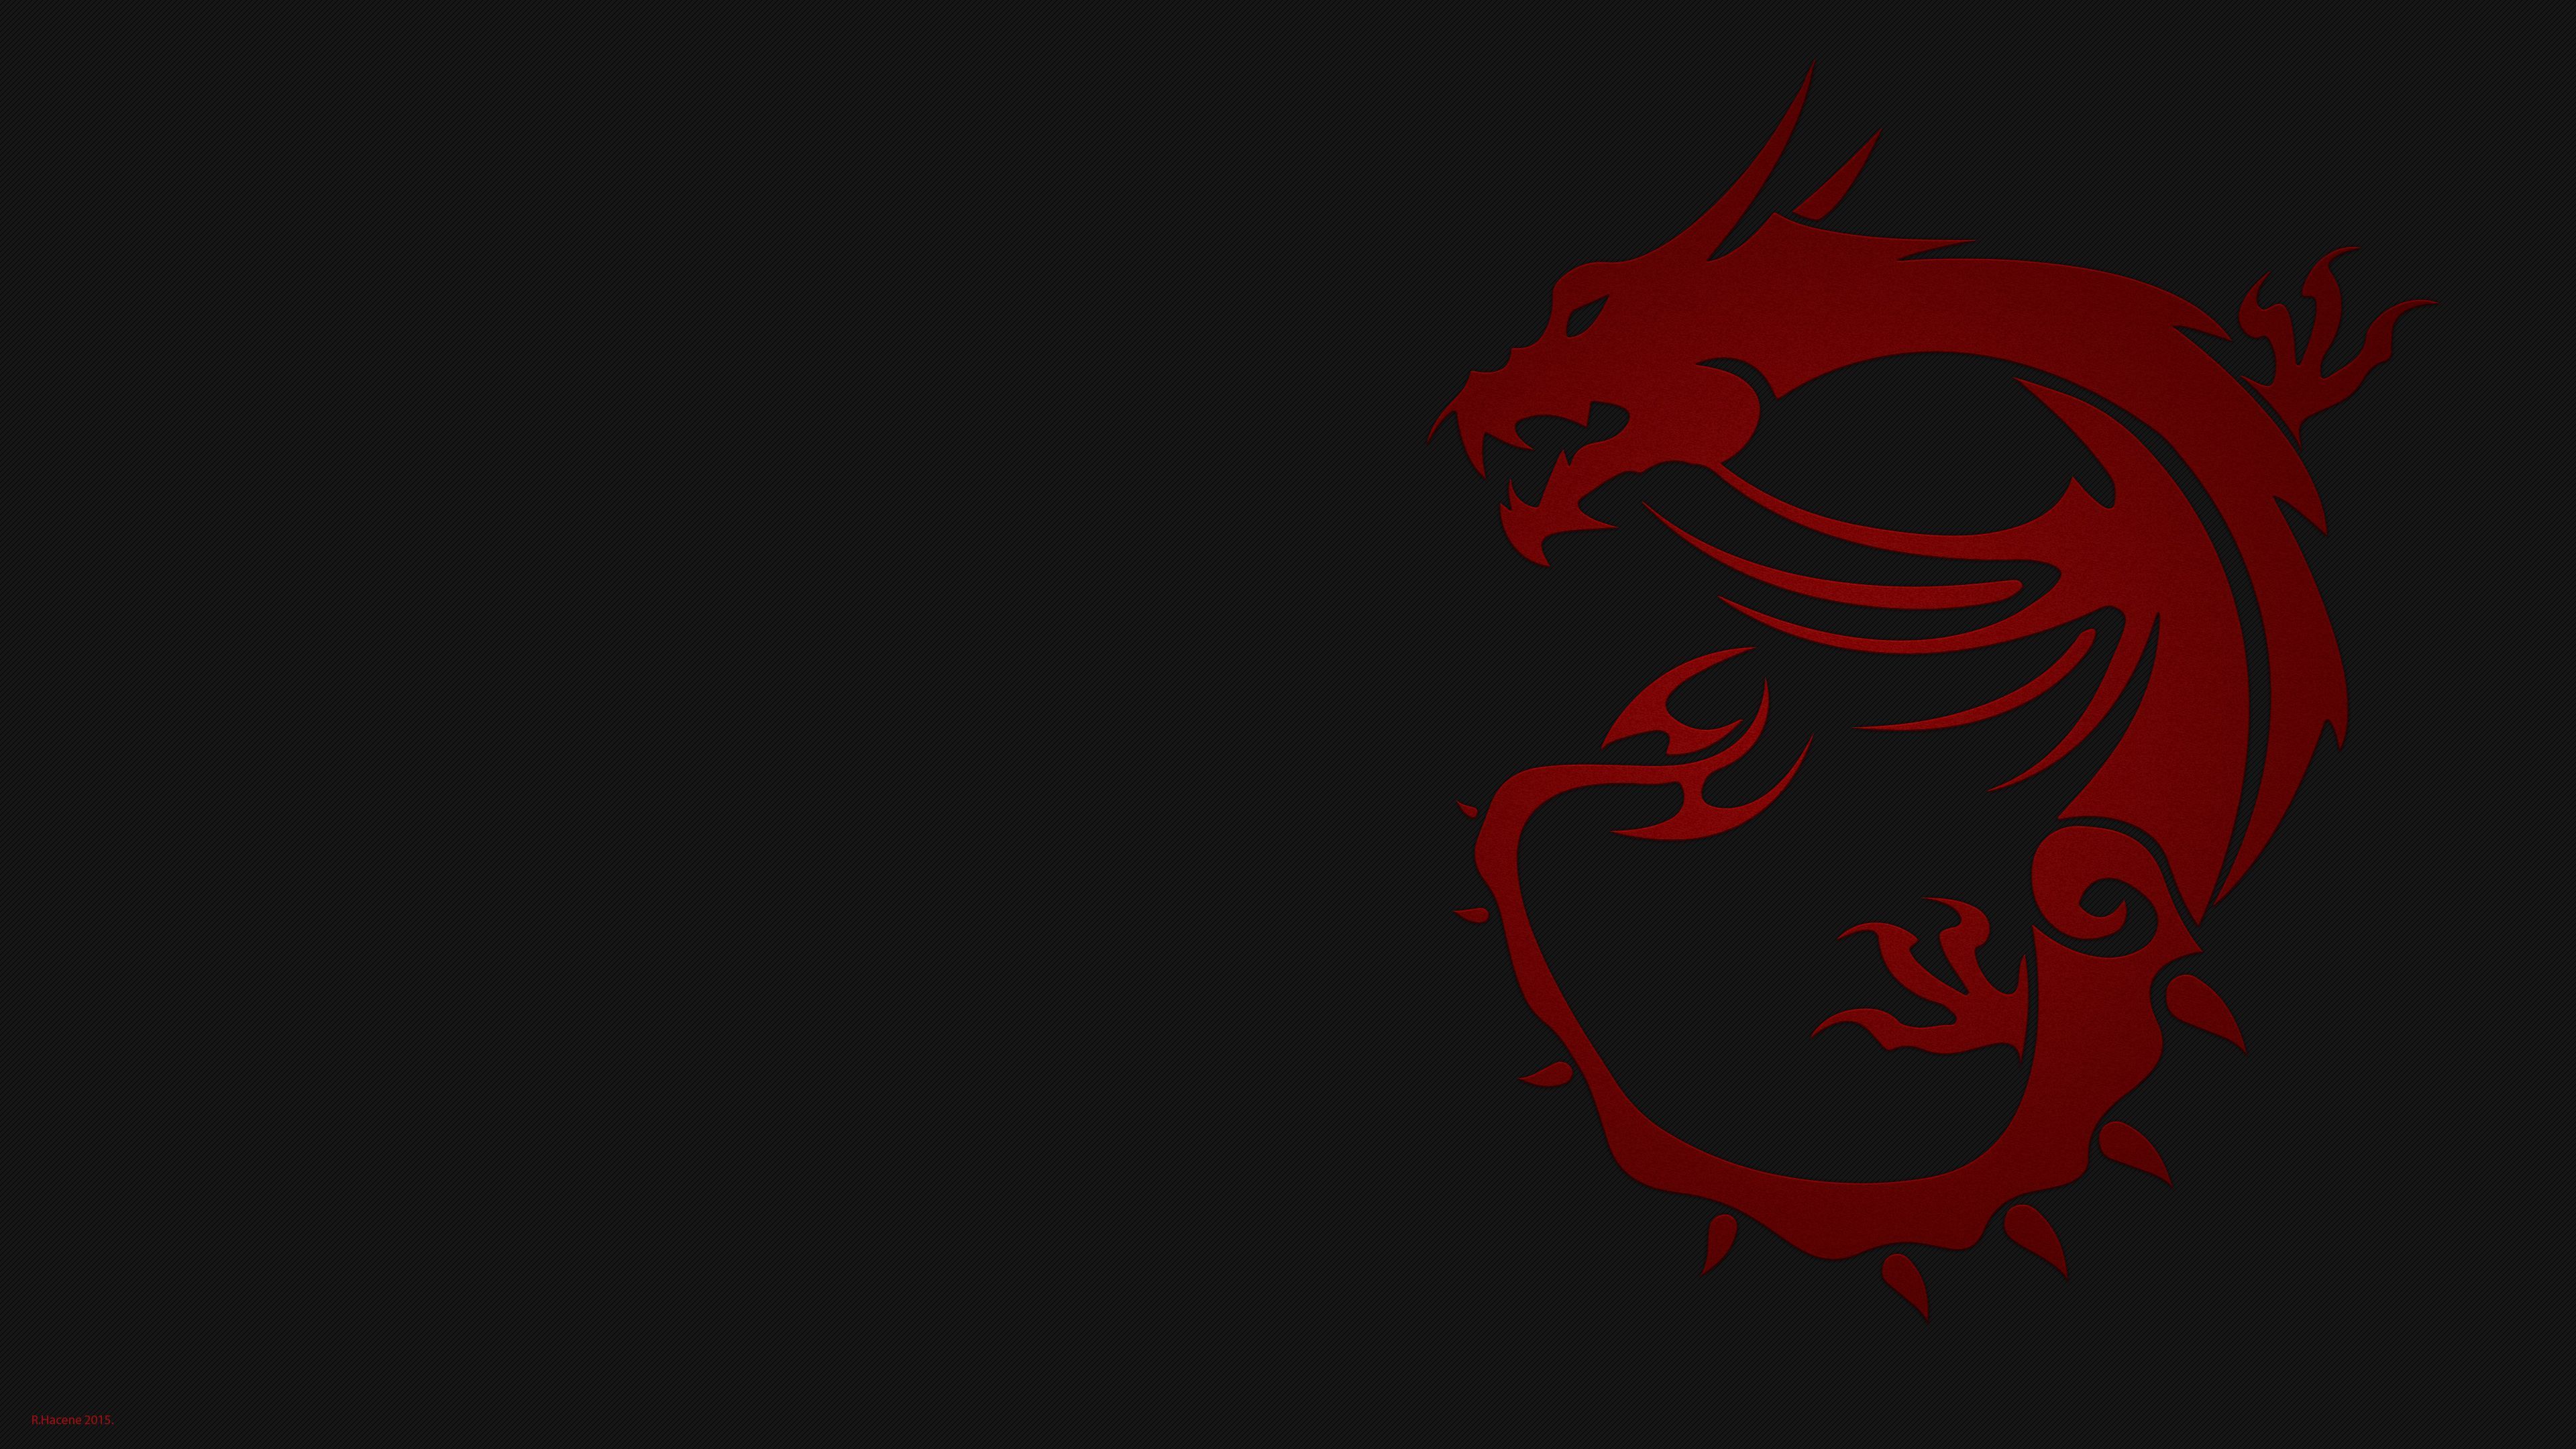 msi dragon eye this app can only be run on msi products